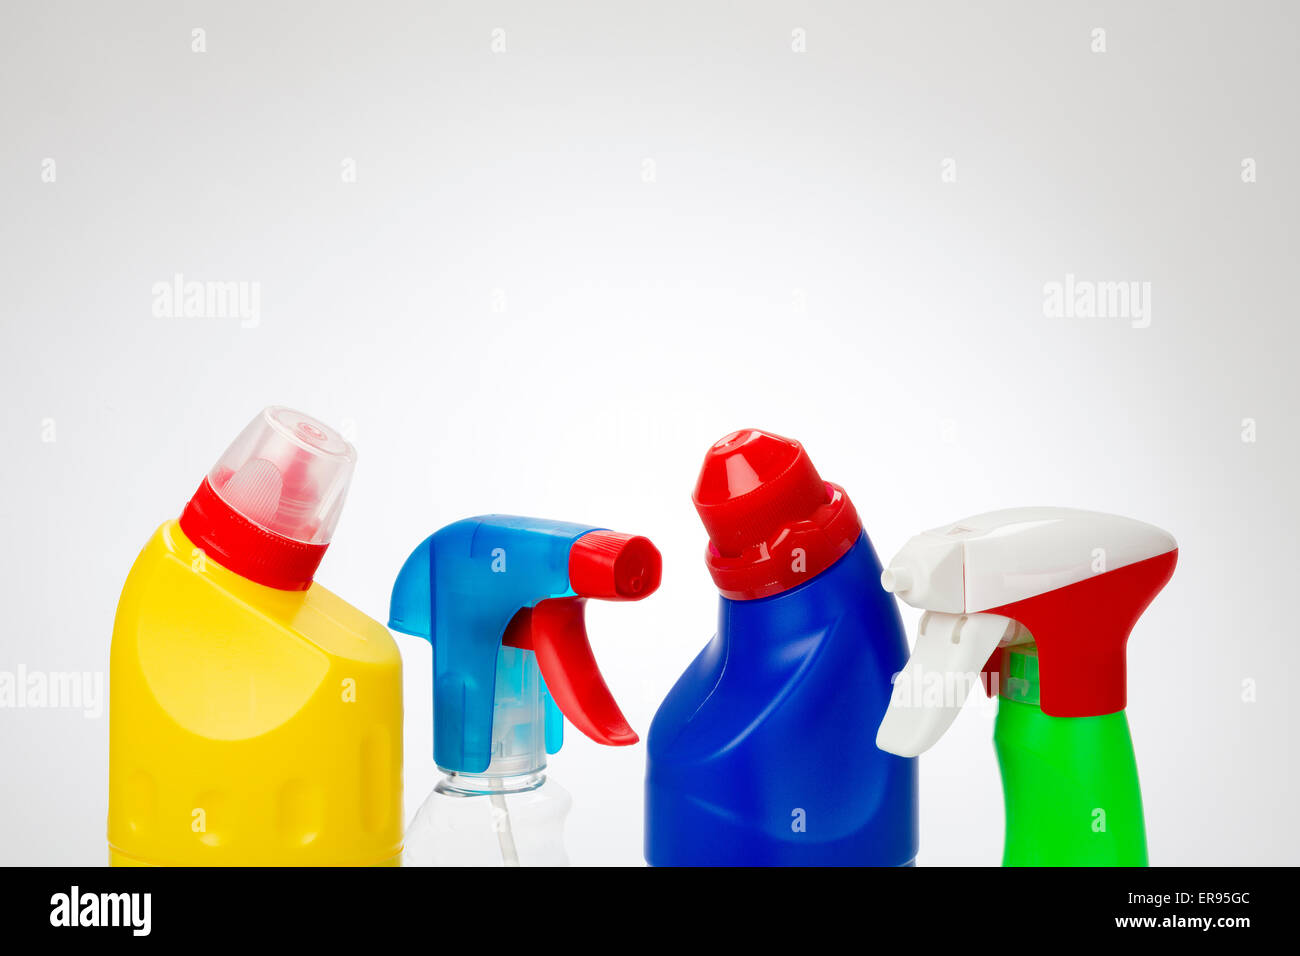 Plastic Cleaning Product Bottles with spot light background Stock Photo